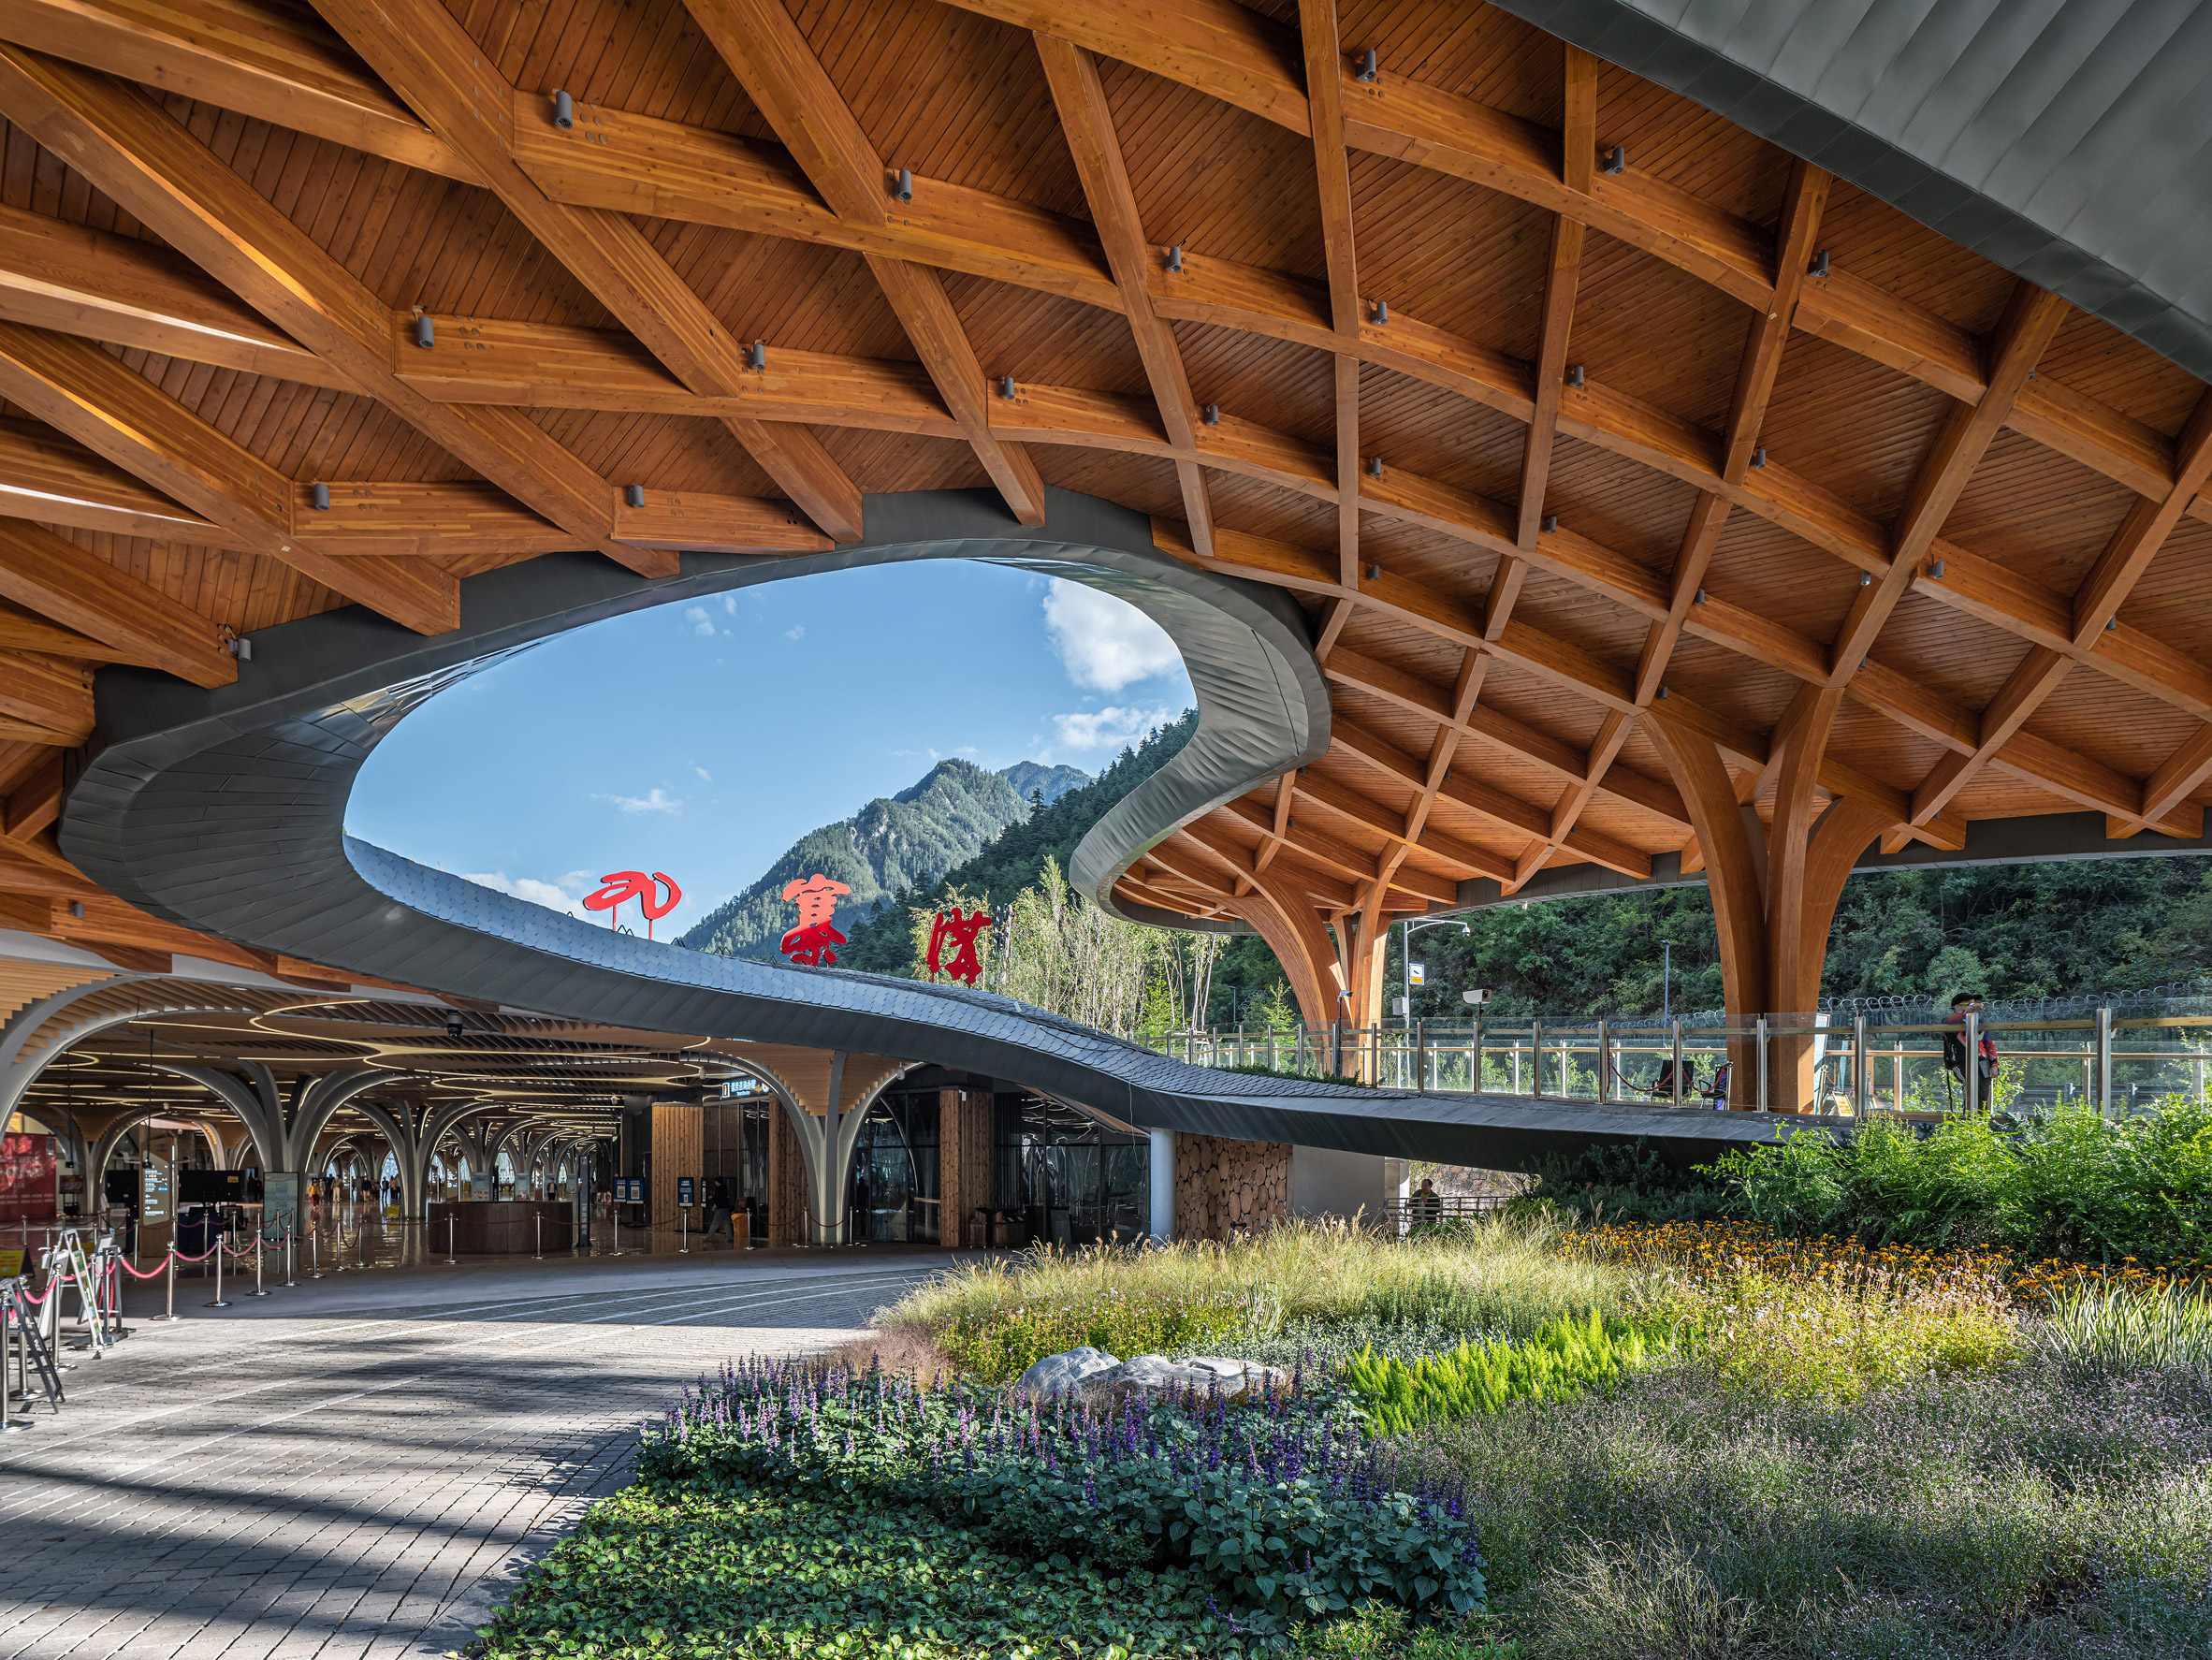 Image of a curving wooden canopy at Jiuzhai Valley Visitor Centre